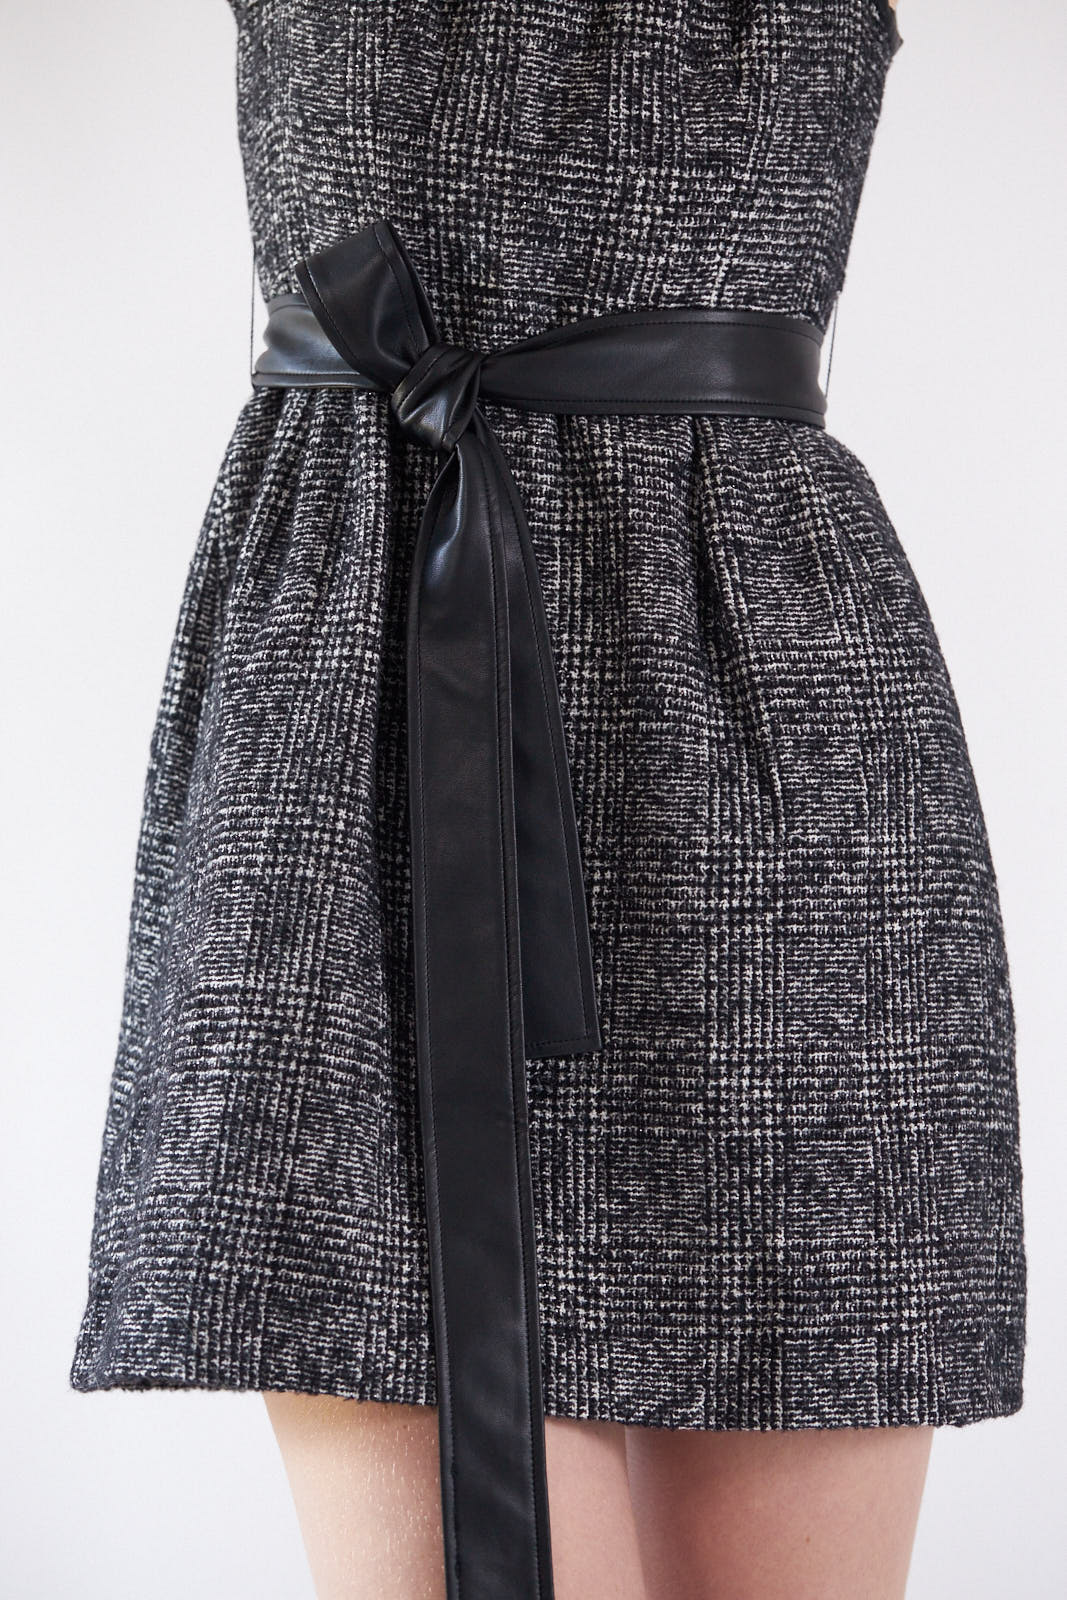 Introducing the Boss Woman Tweed Dress from Le Réussi!